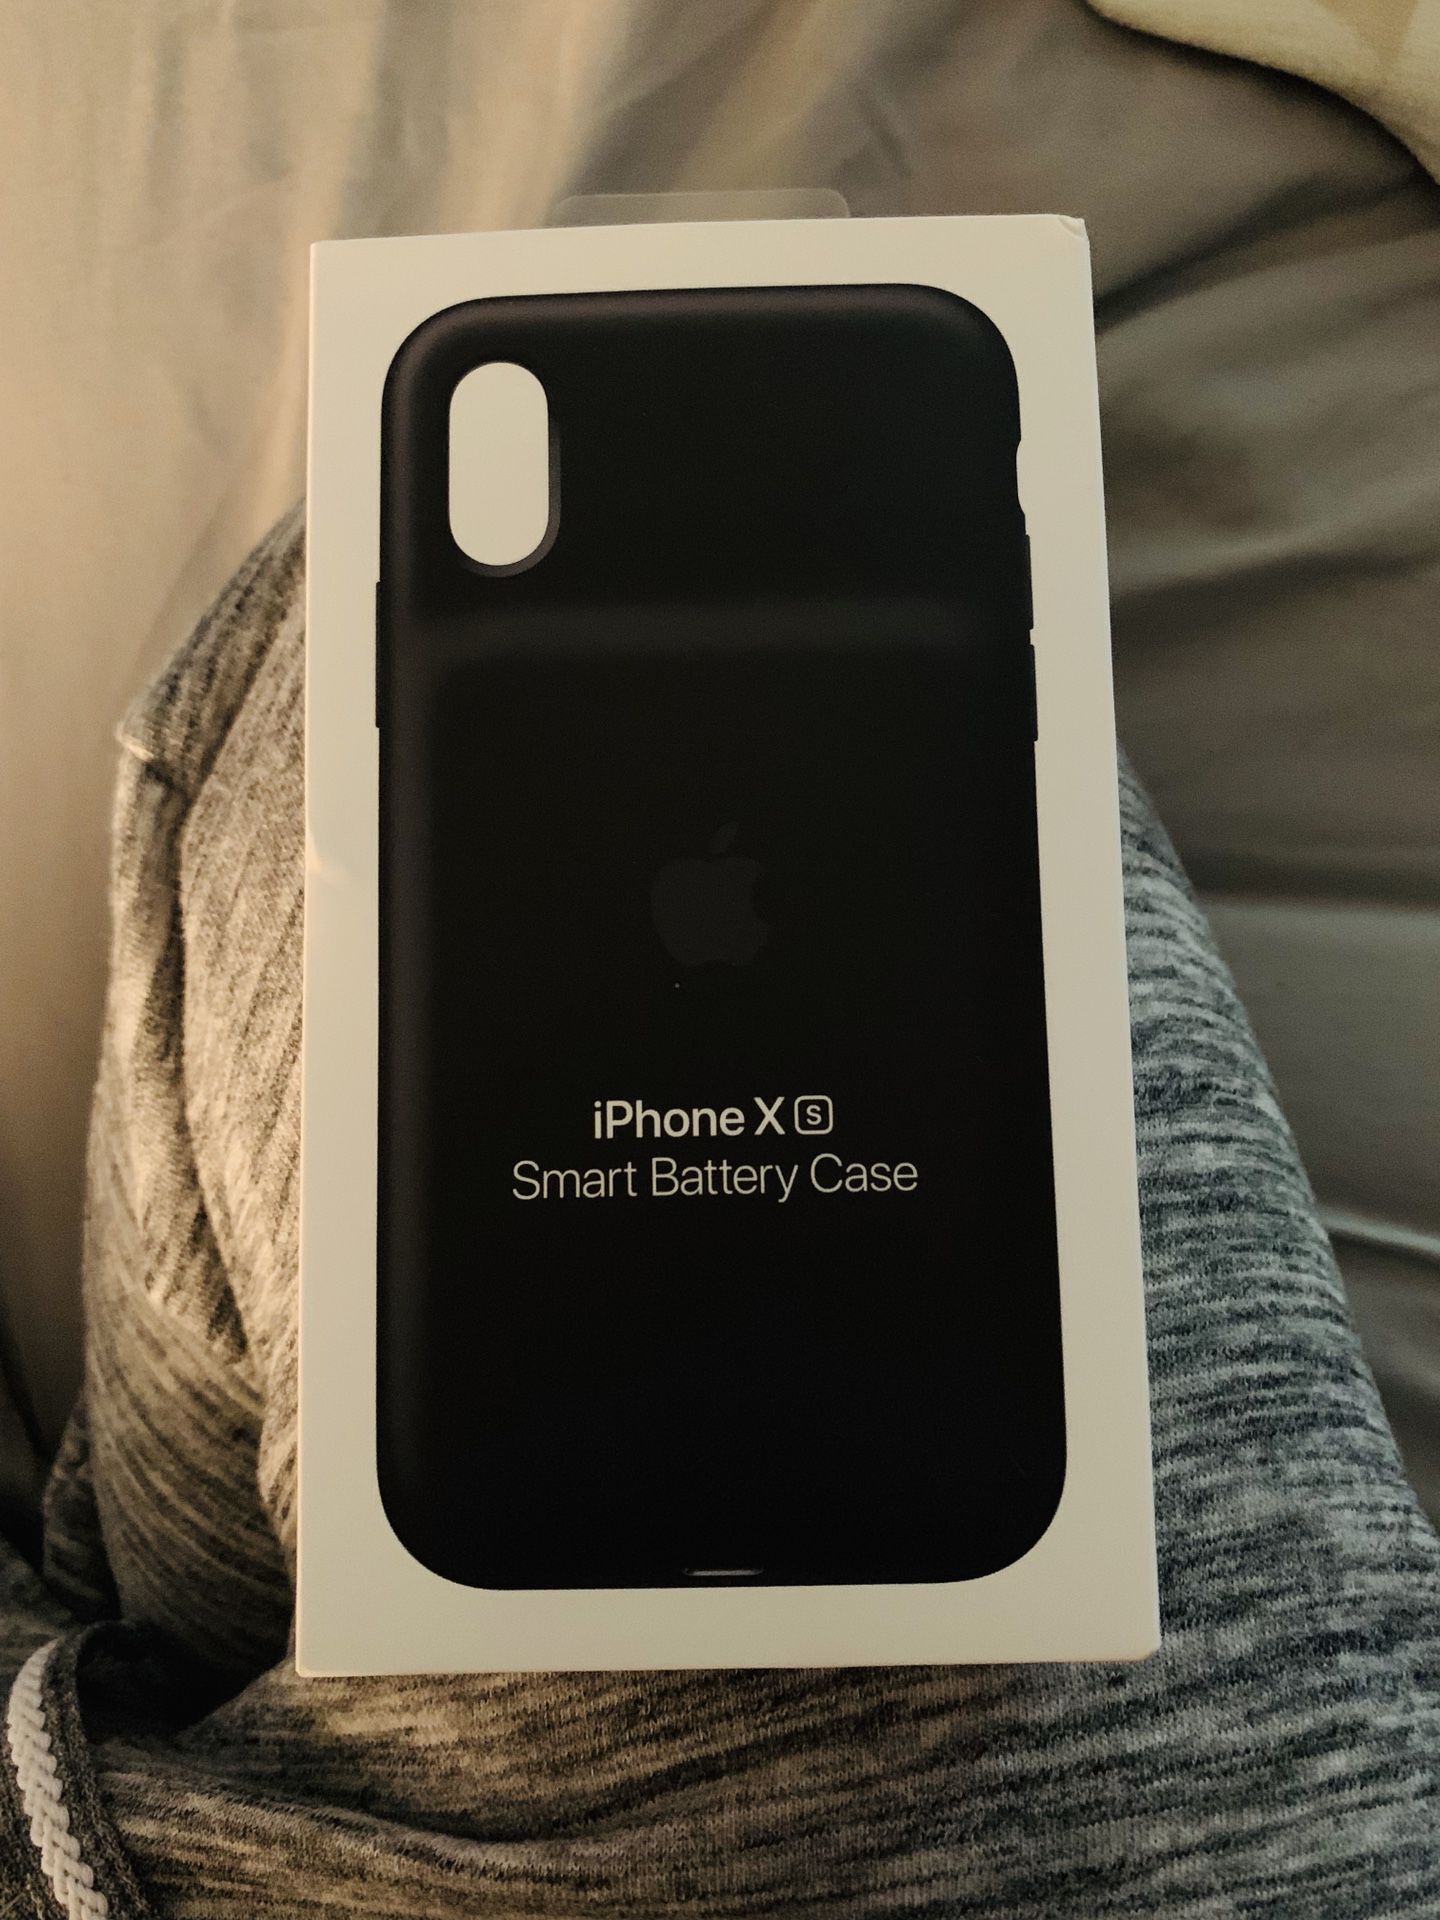 Brand new Smart Batter Case for iPhone XS. Never used